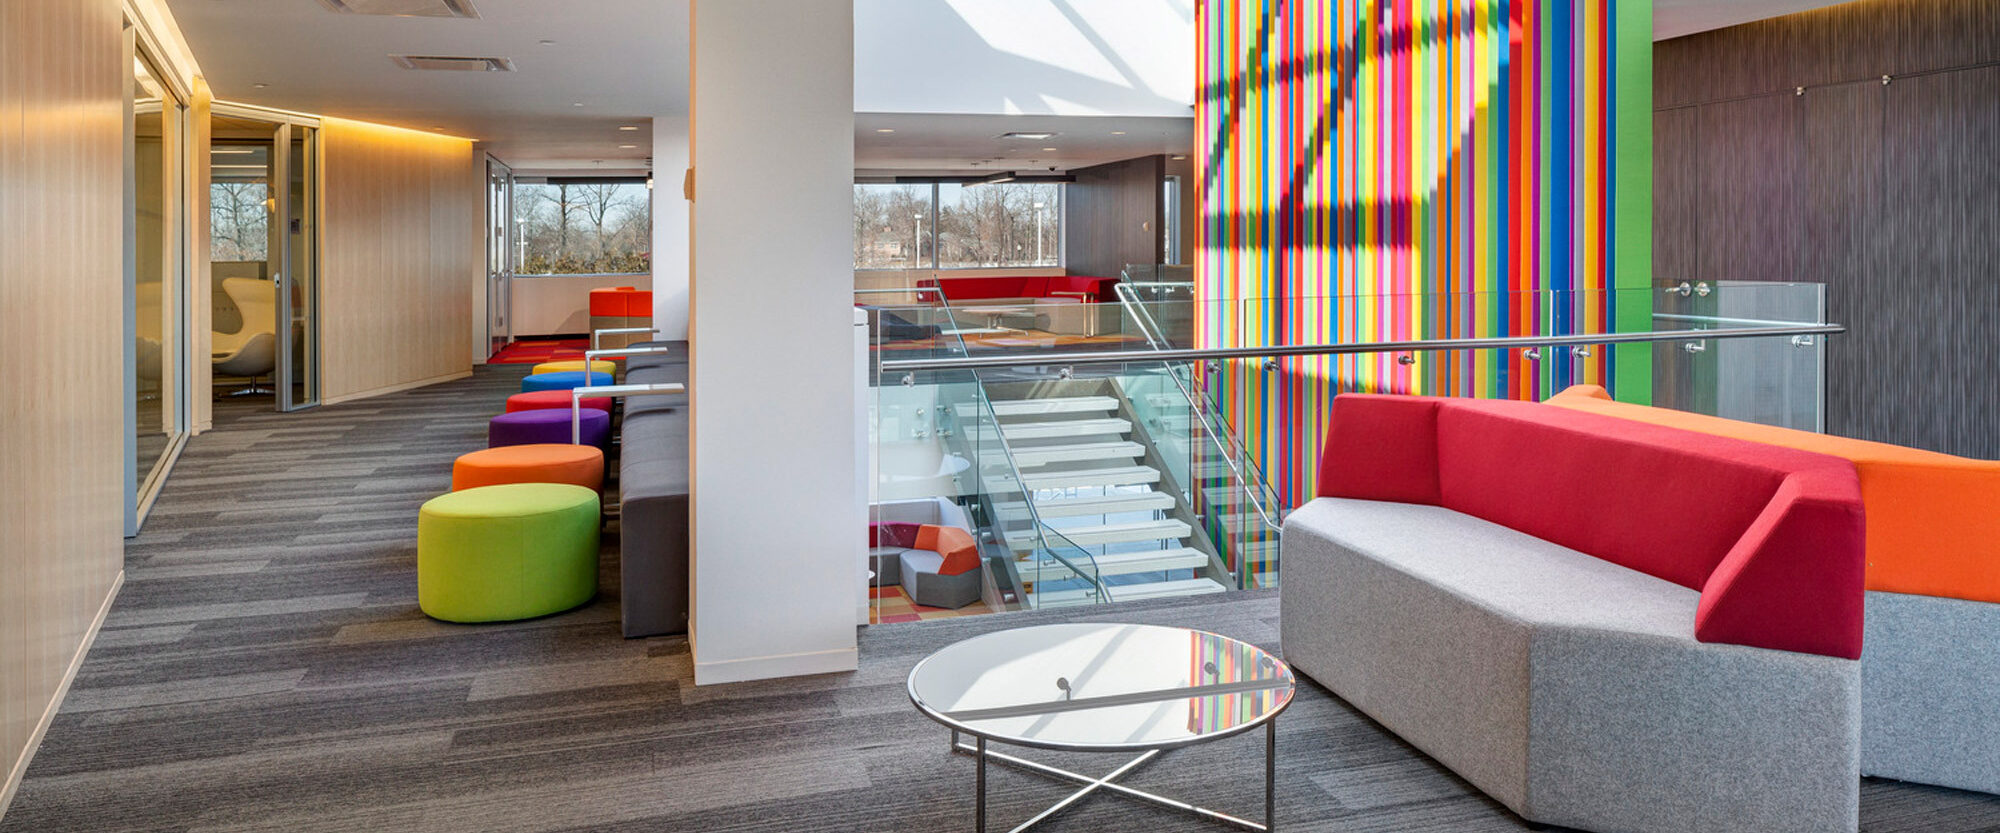 Bright modern office lobby featuring a colorful striped partition, gray carpeted flooring, minimalist glass stair railing, vibrant furniture accents, and ample natural lighting from skylights above.